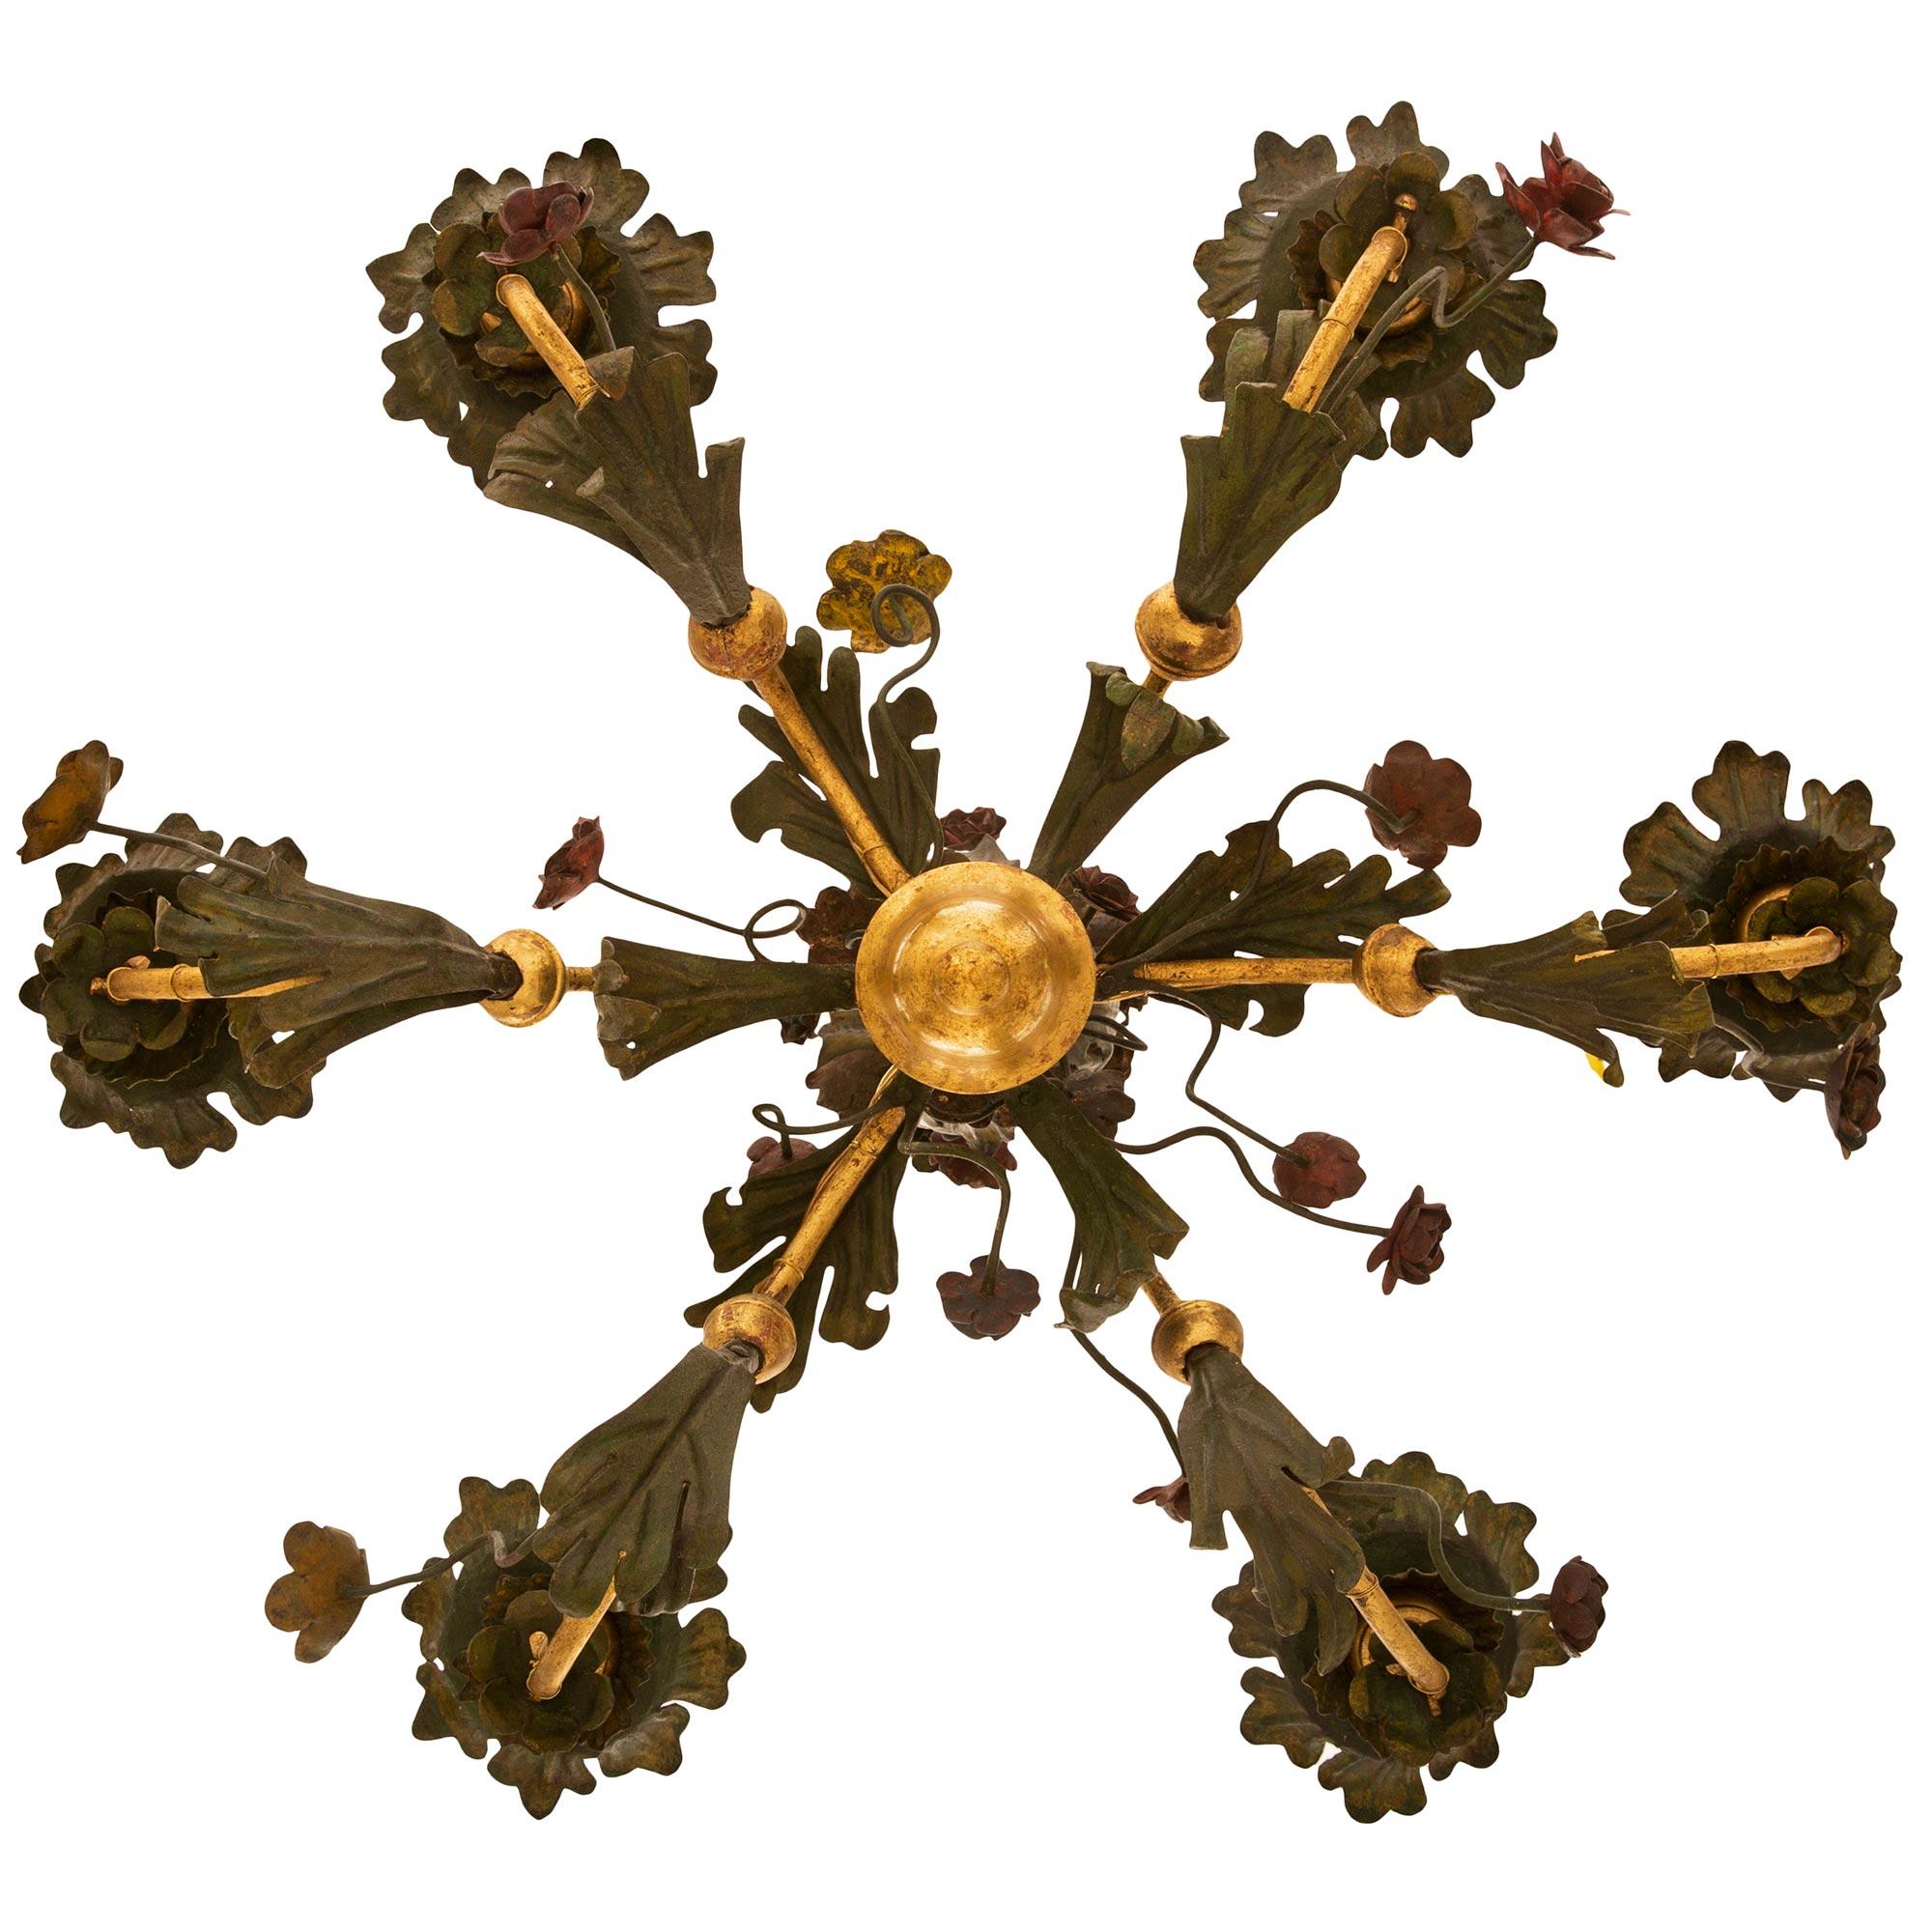 An Italian 19th century Tuscan st. patinated and gilt iron chandelier. This whimsical six arm chandelier is centered by an inverted bell-shaped Giltwood final leading up to the six scrolled arms adorned with large patinated iron acanthus leaves and